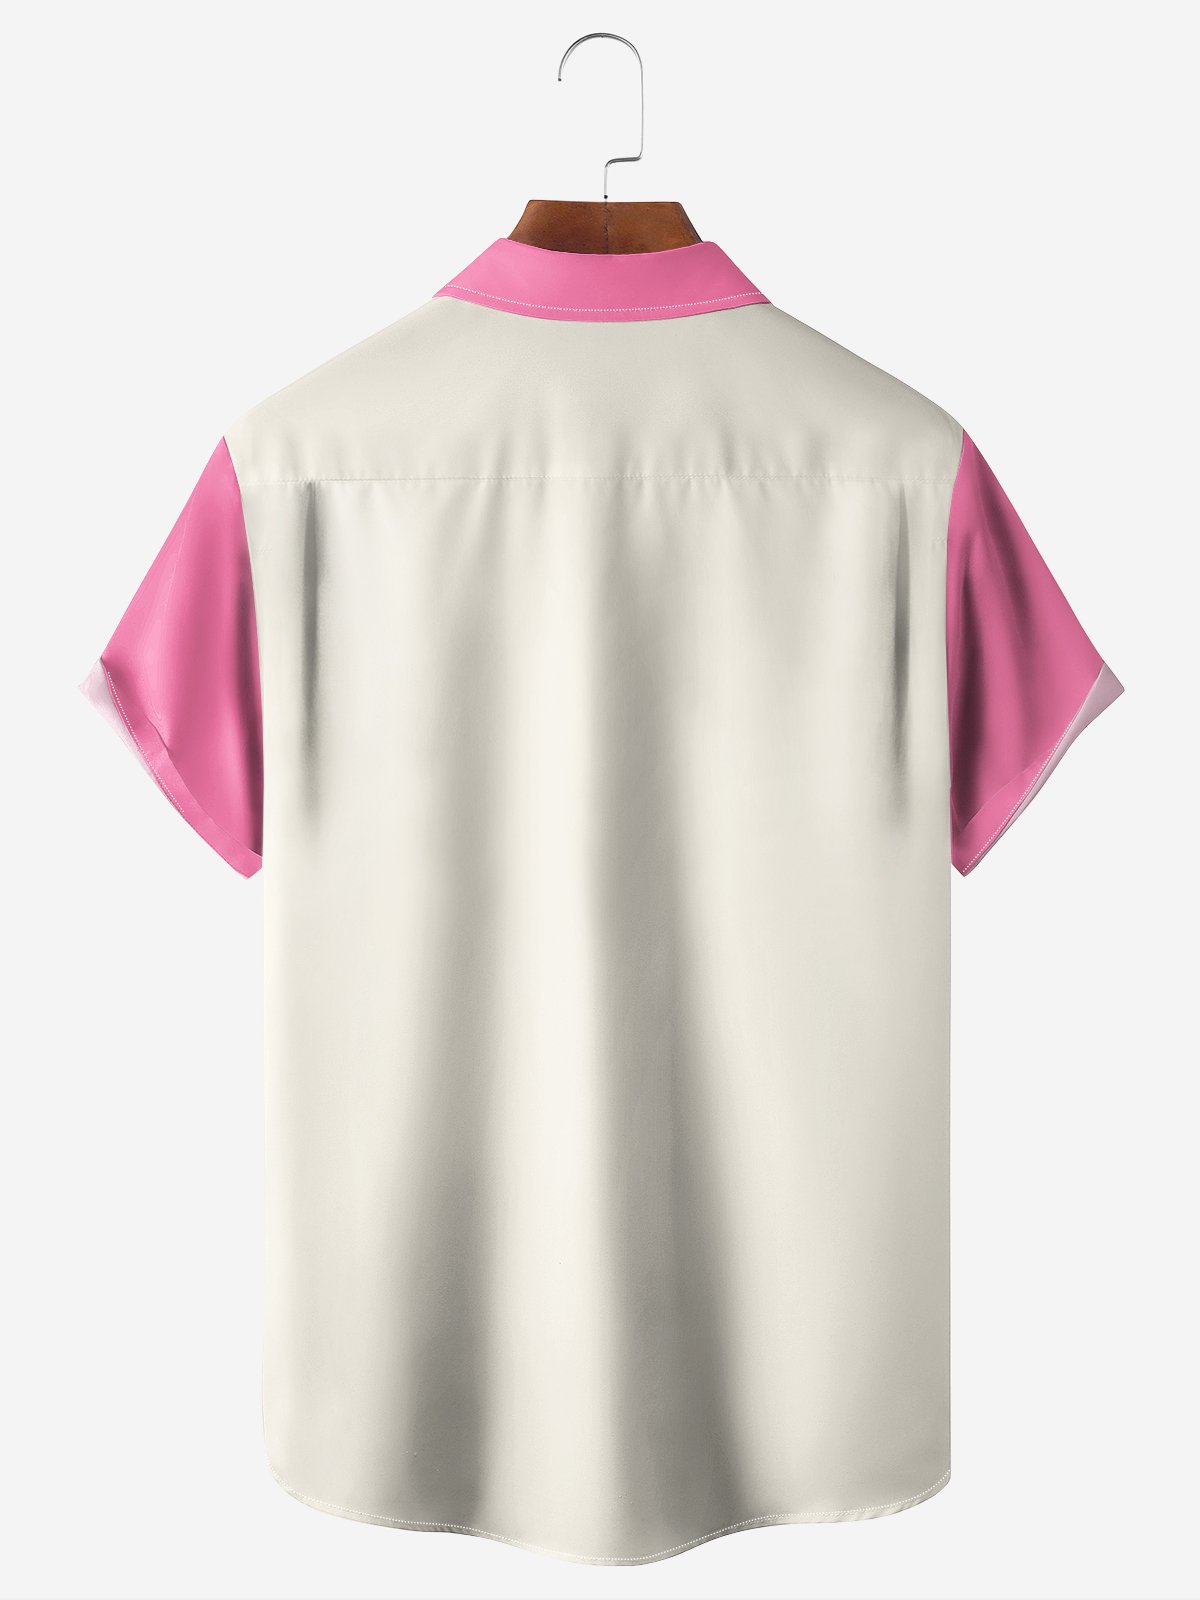 Moisture-wicking Parrot Cocktail Chest Pocket Bowling Shirt